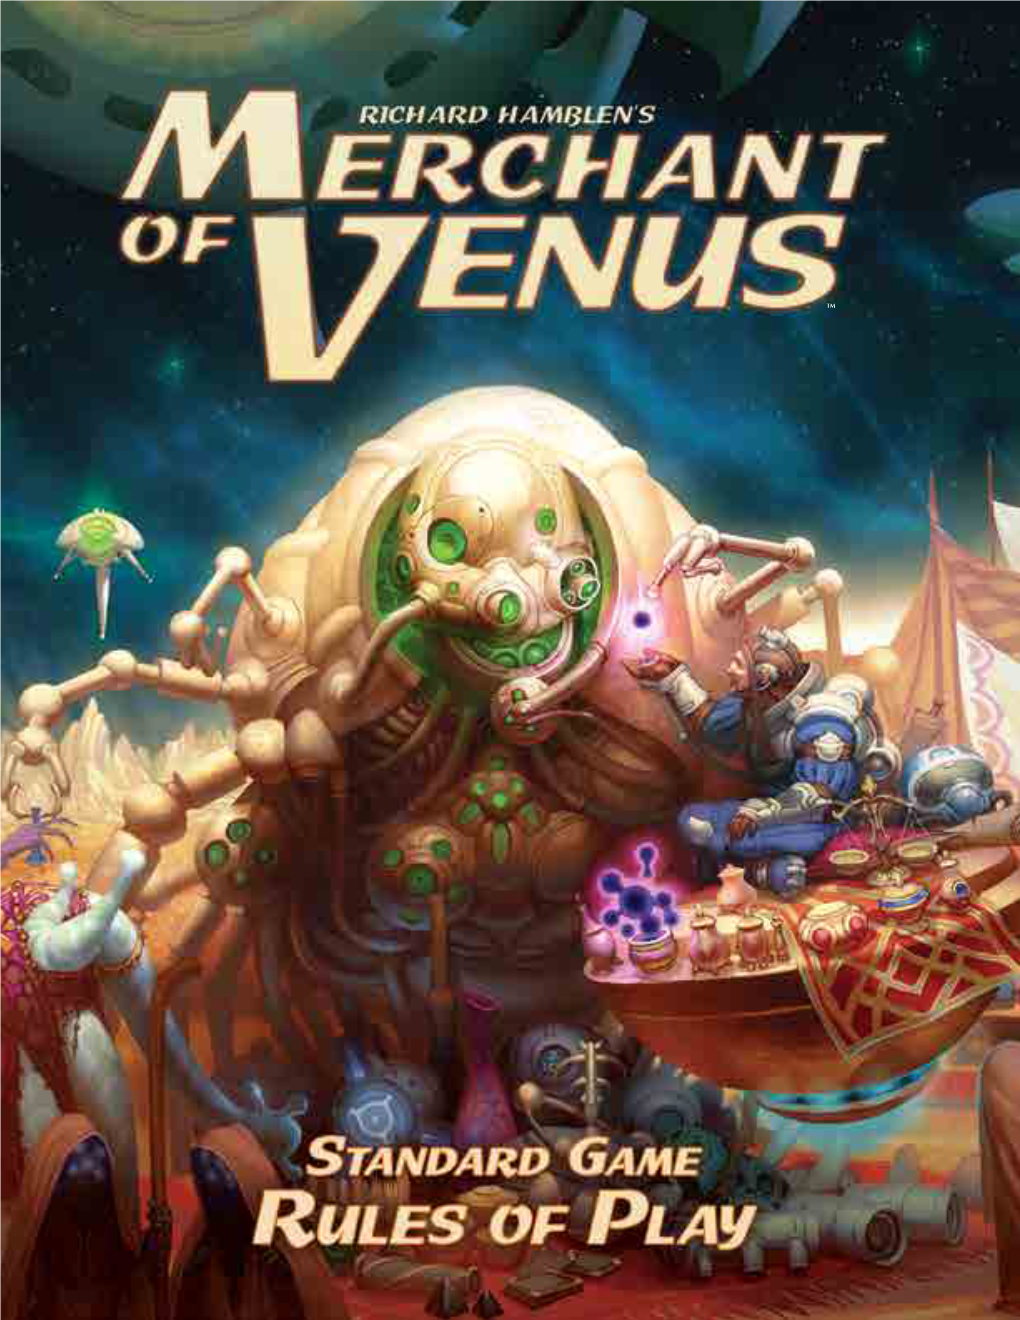 Merchant of Venus Is a Game of Interstellar Trade and the Object of the Game Is to Be the Player with the Most Exploration for One to Four Players